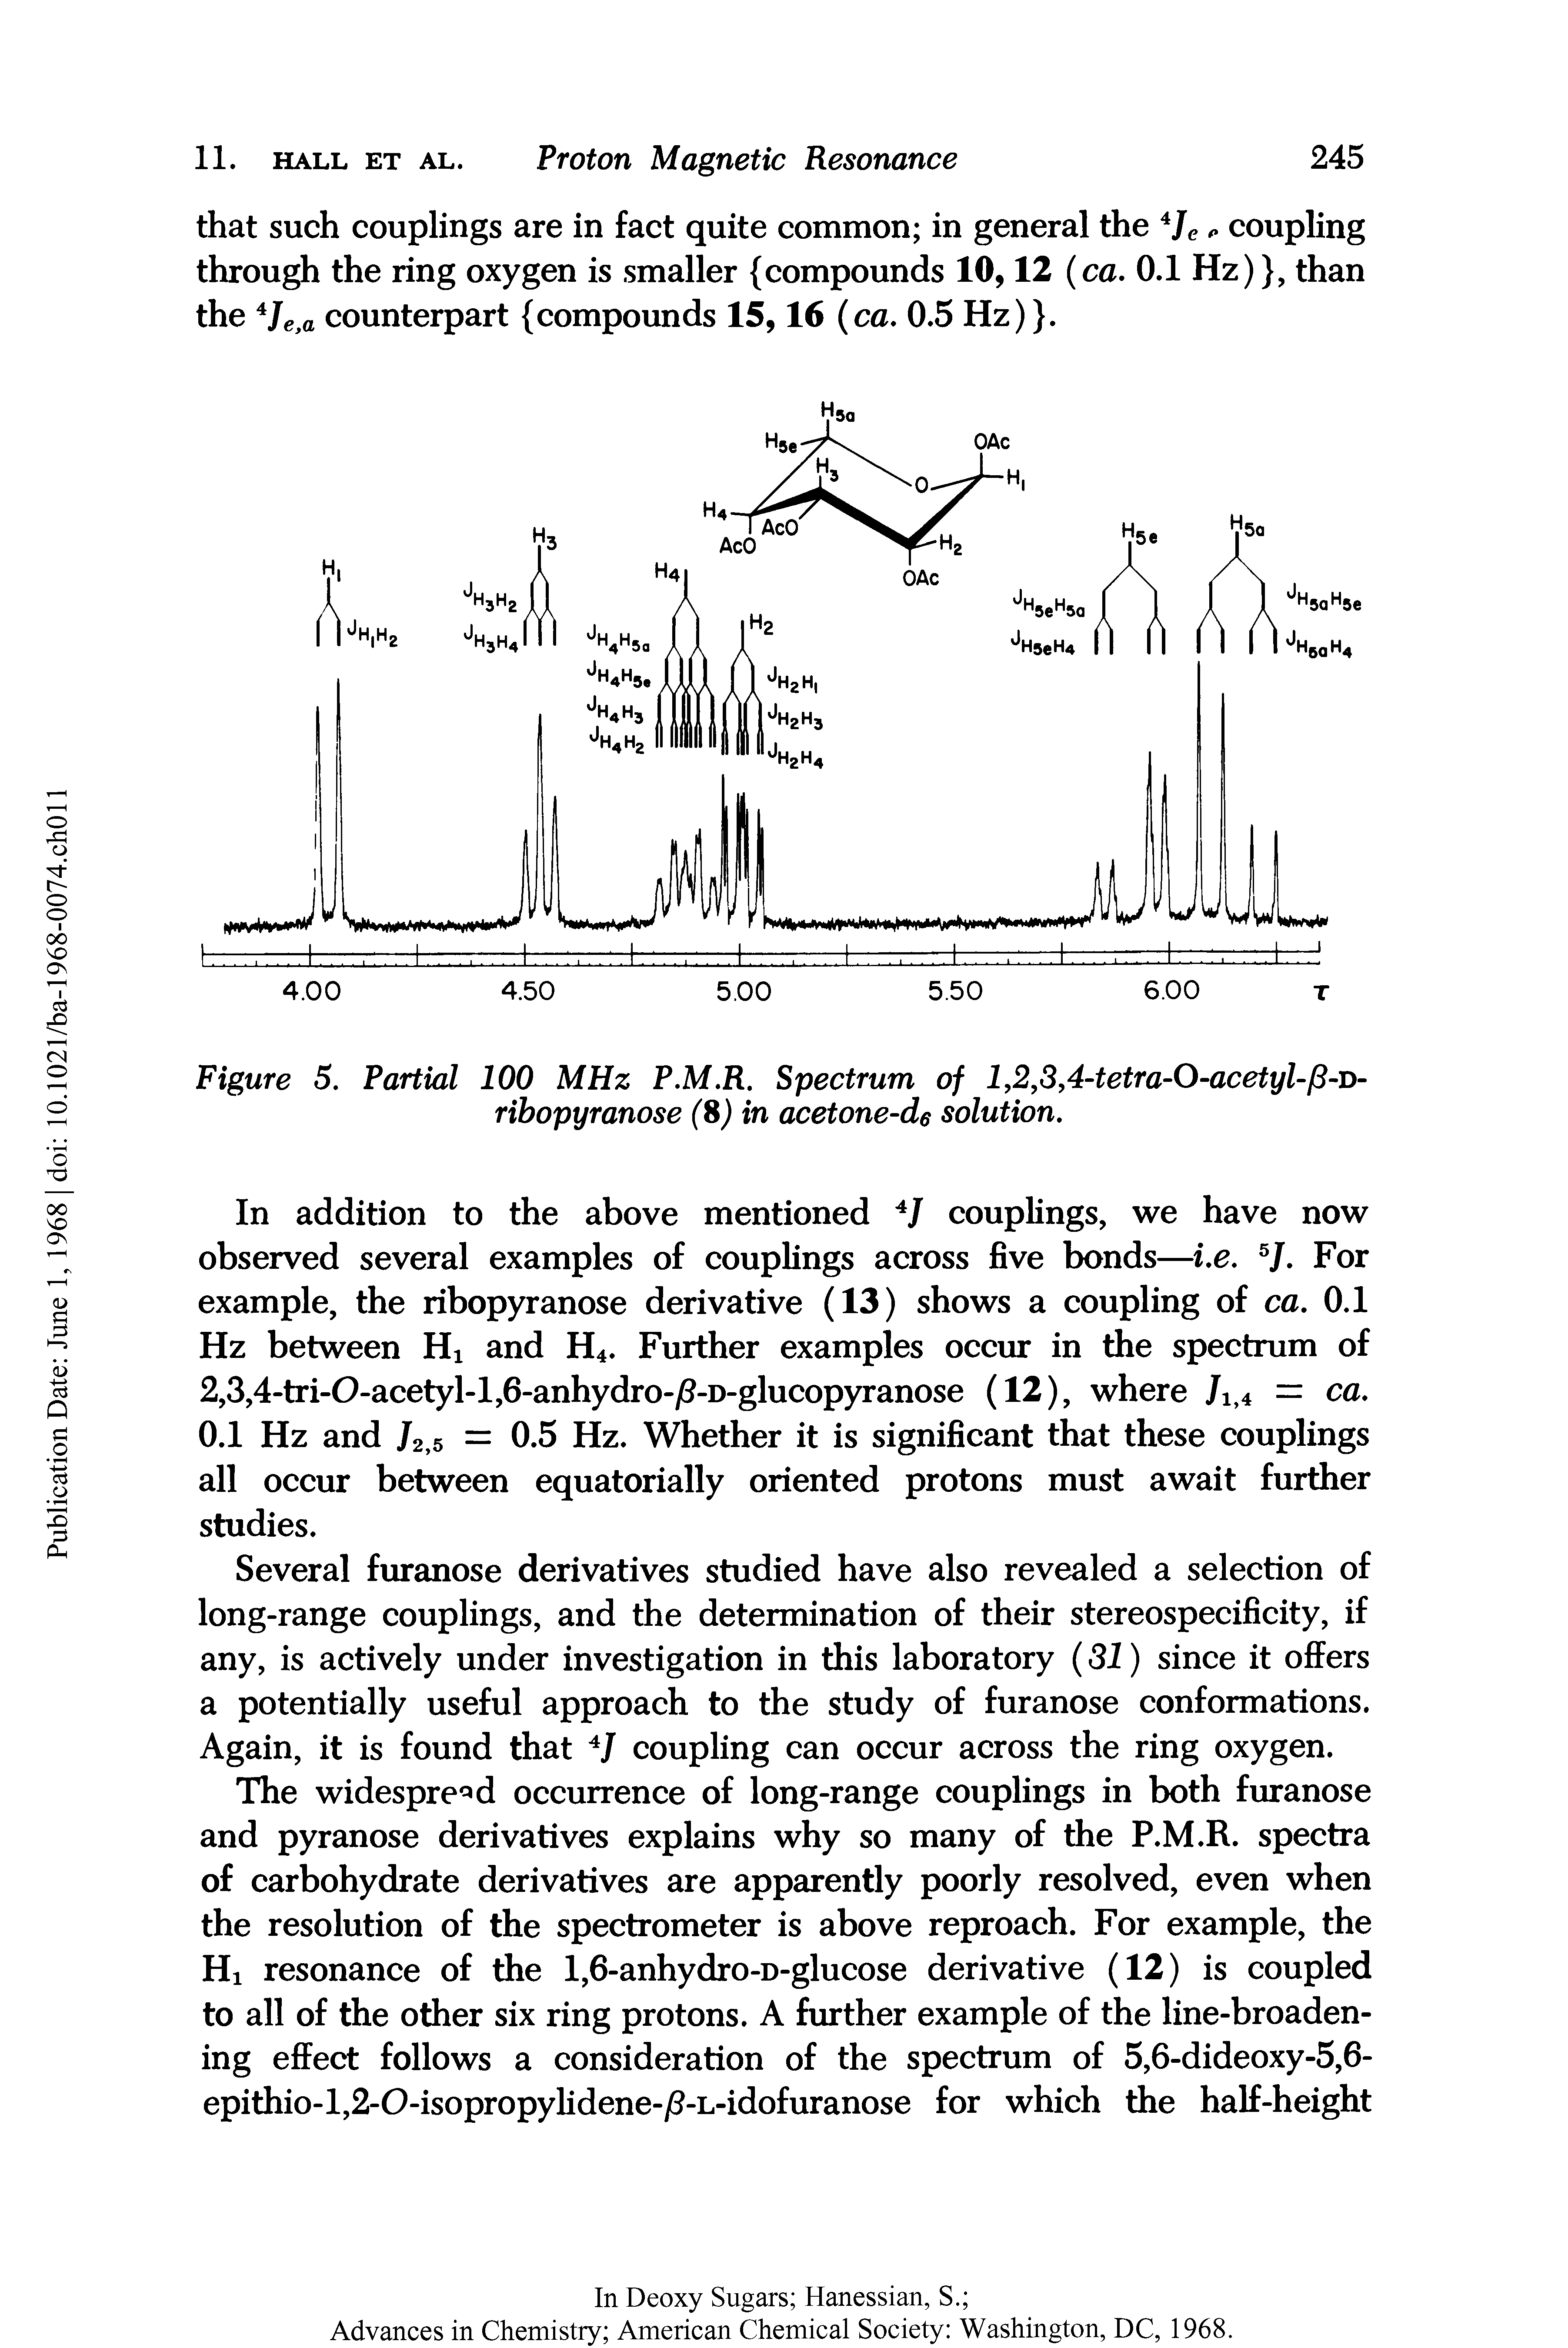 Figure 5. Partial 100 MHz P.M.R. Spectrum of l,2,3,4-tetra-0-acetyl-f3-i>-ribopyranose (8) in acetone-d6 solution.